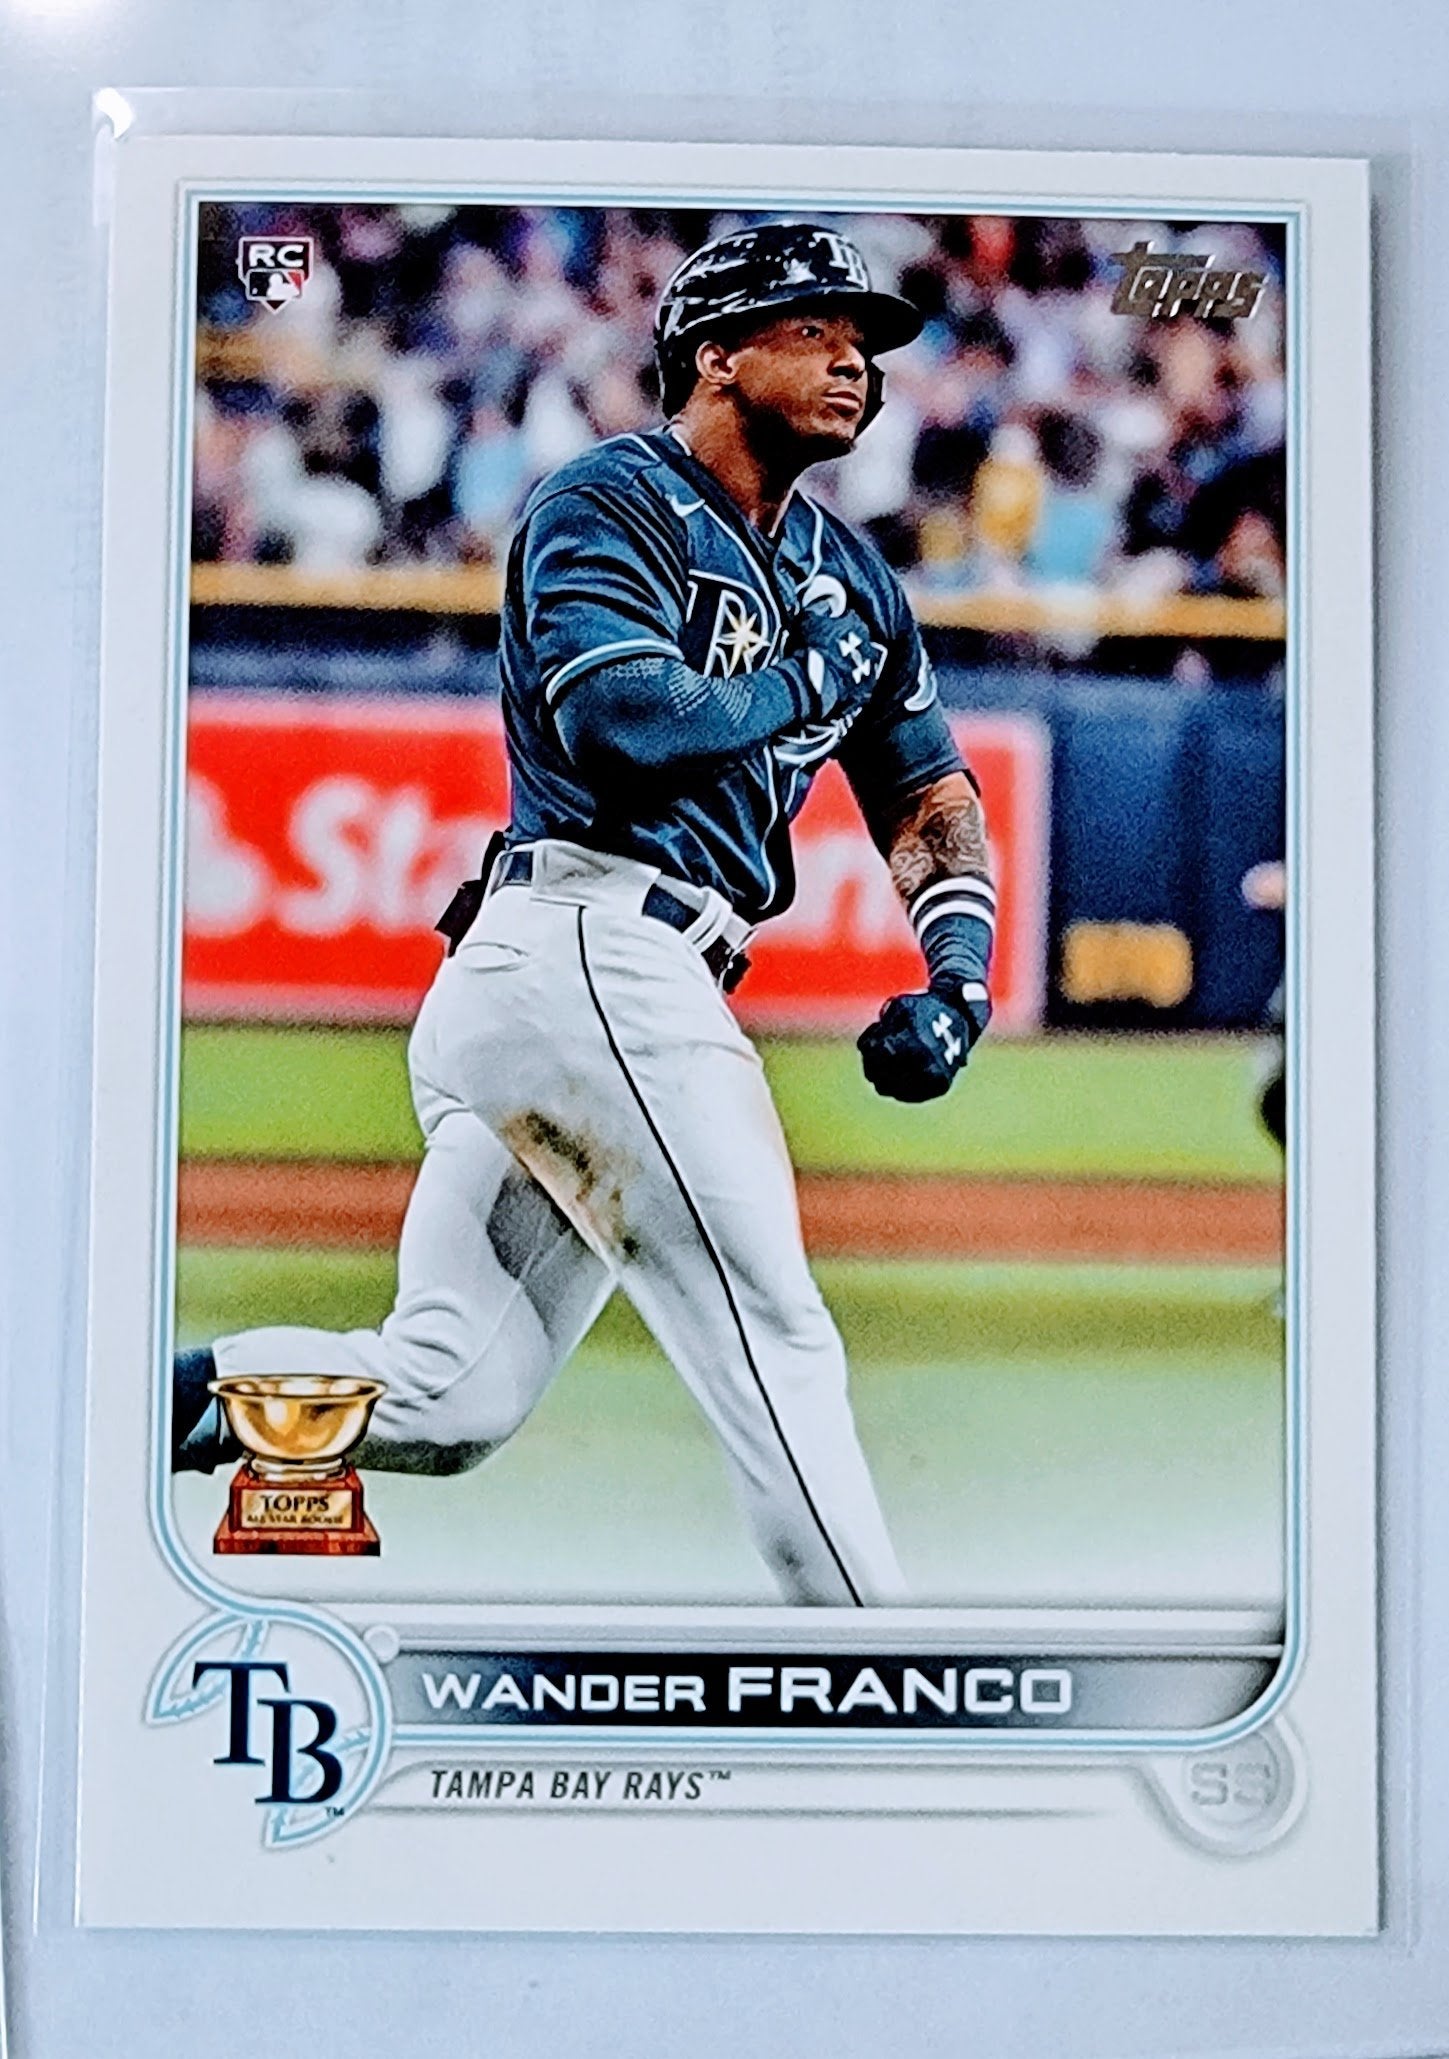 2022 Topps Wander Franco All Star Rookie Cup Baseball Trading Card GRB1